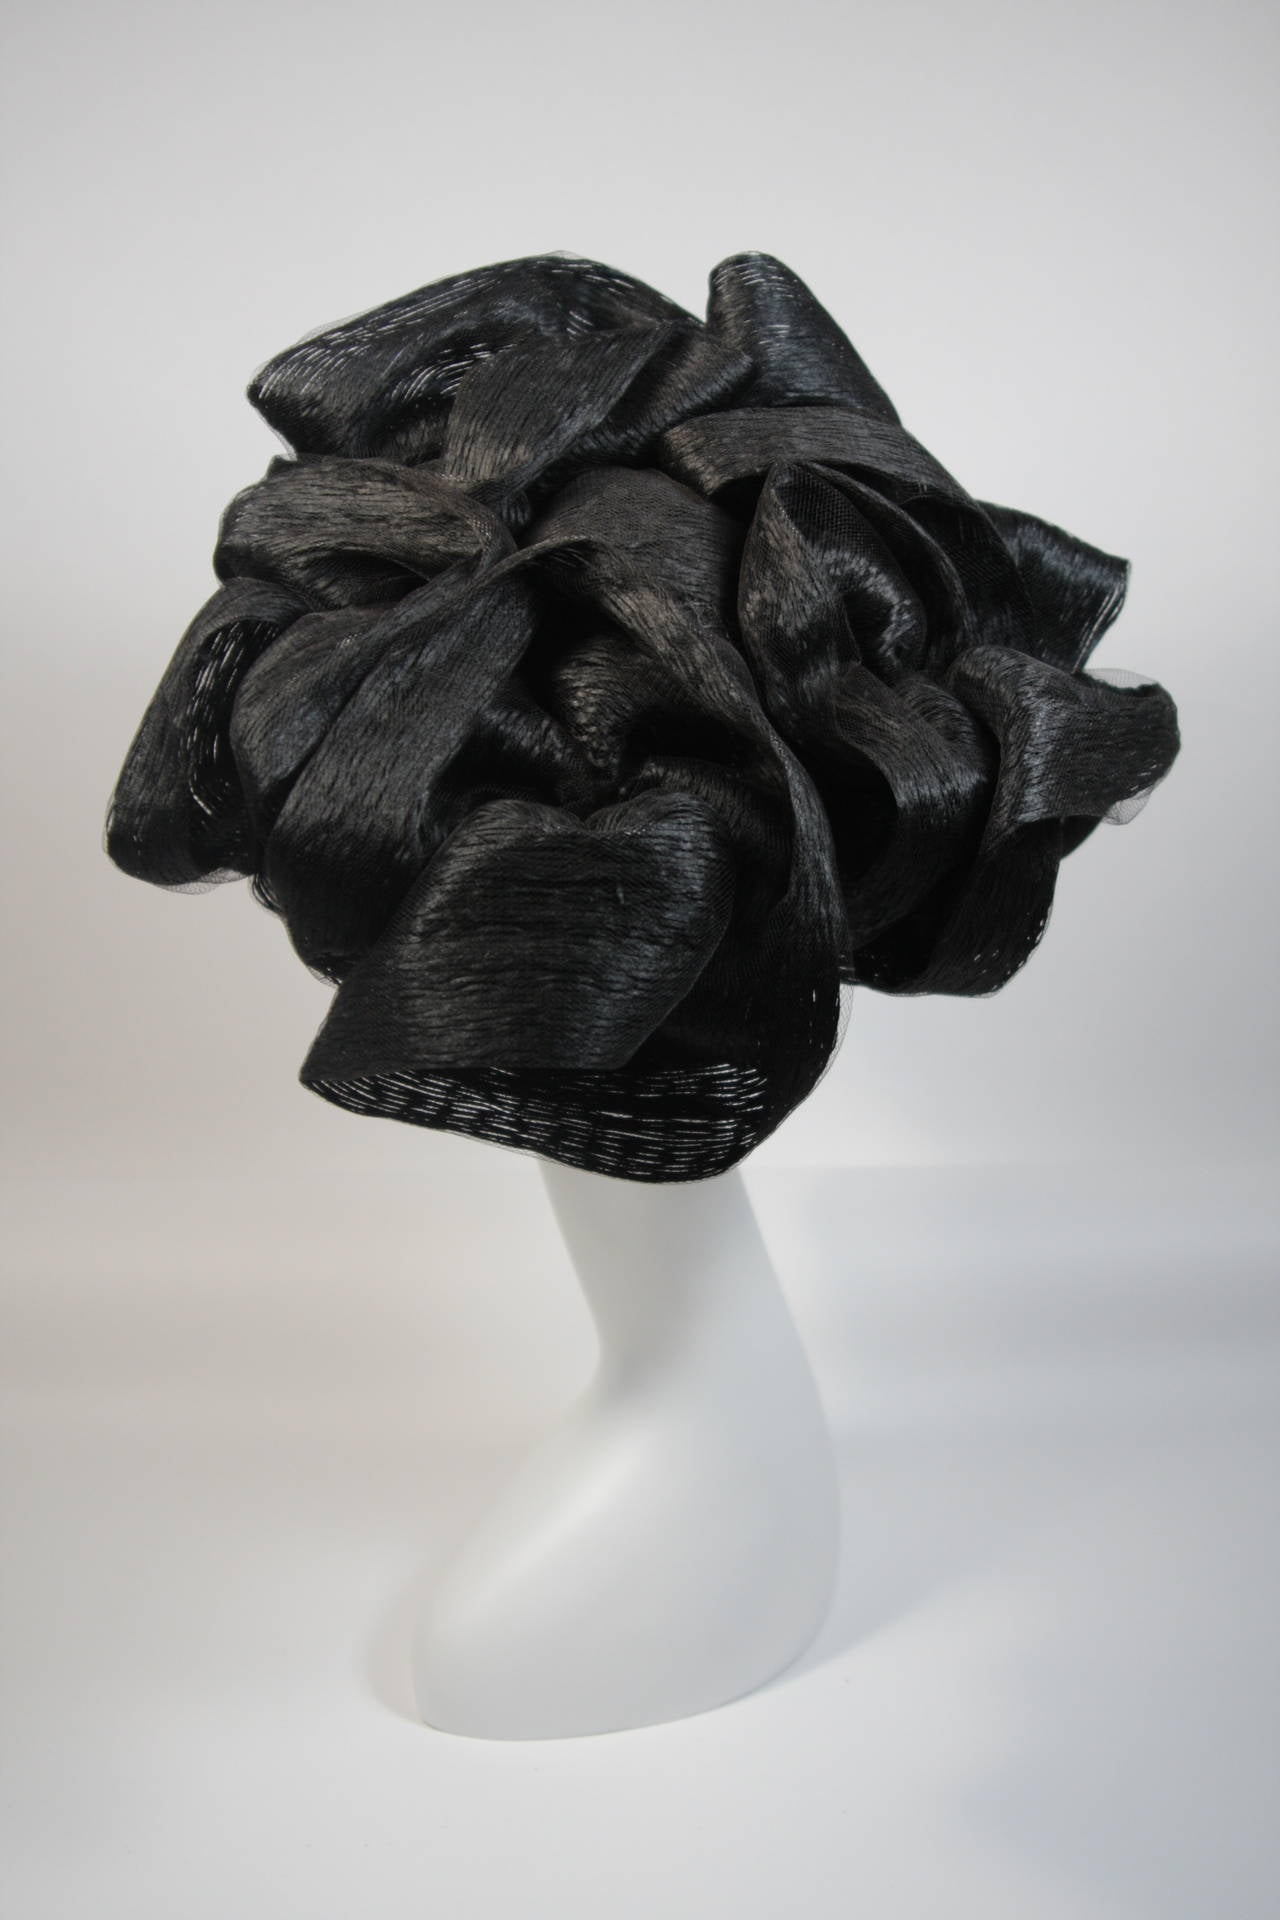 This Maria Pia hat is composed of a black ribbon in net, designed with dimension. In excellent condition, the interior fabric of the hat has slight discoloration and fading (see photos). Made in Italy.

**Please cross-reference measurements for